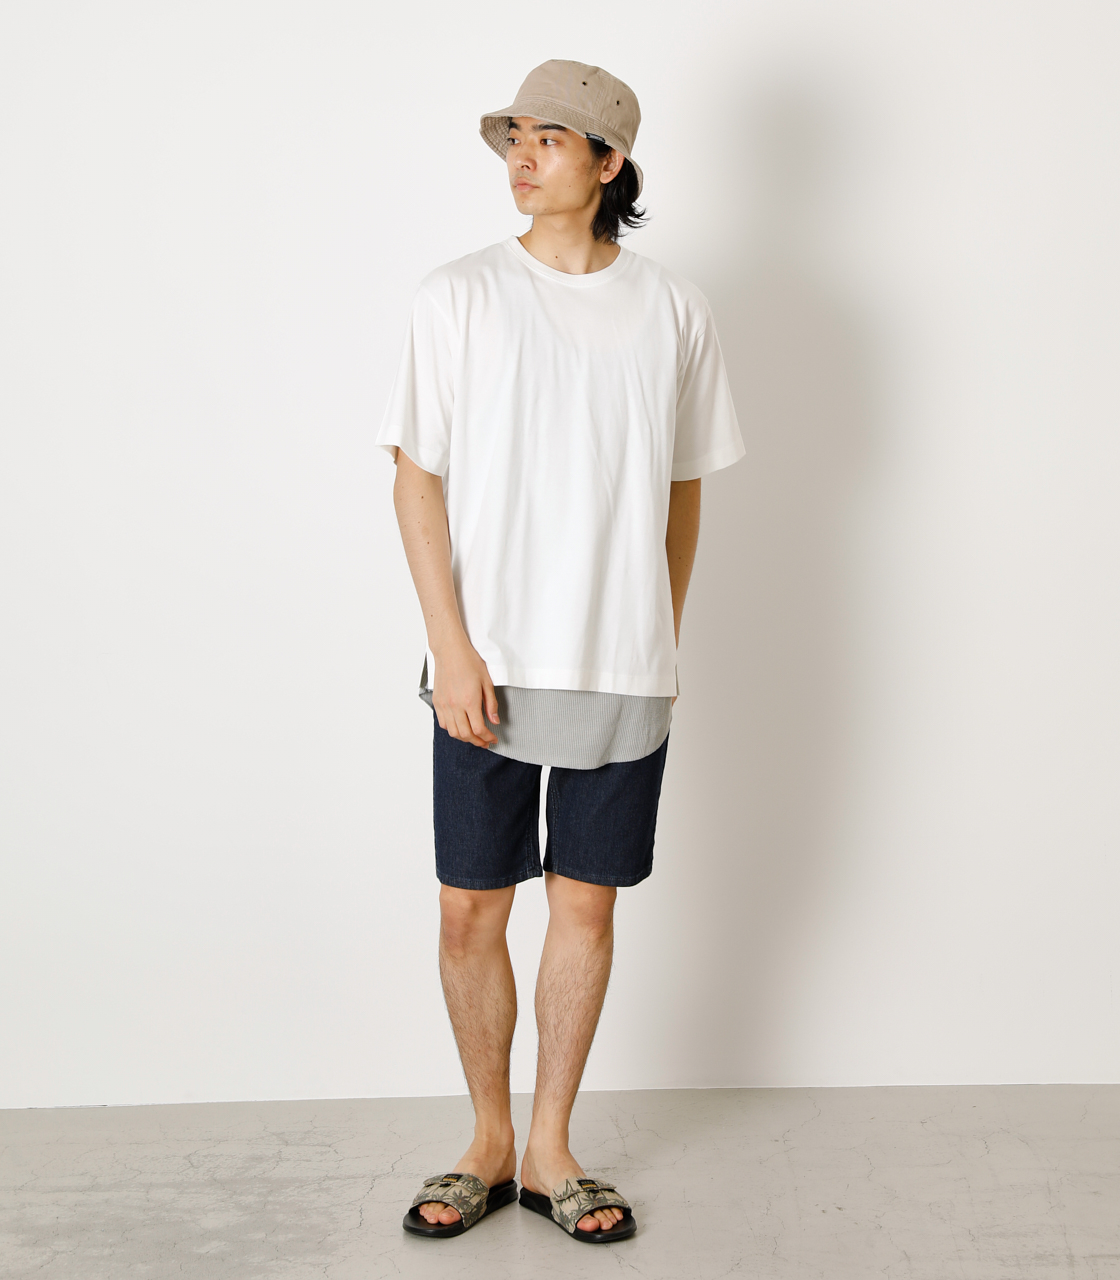 AIR BLOW SHORT PANTS/エアーブロウショートパンツ 詳細画像 One Wash 3